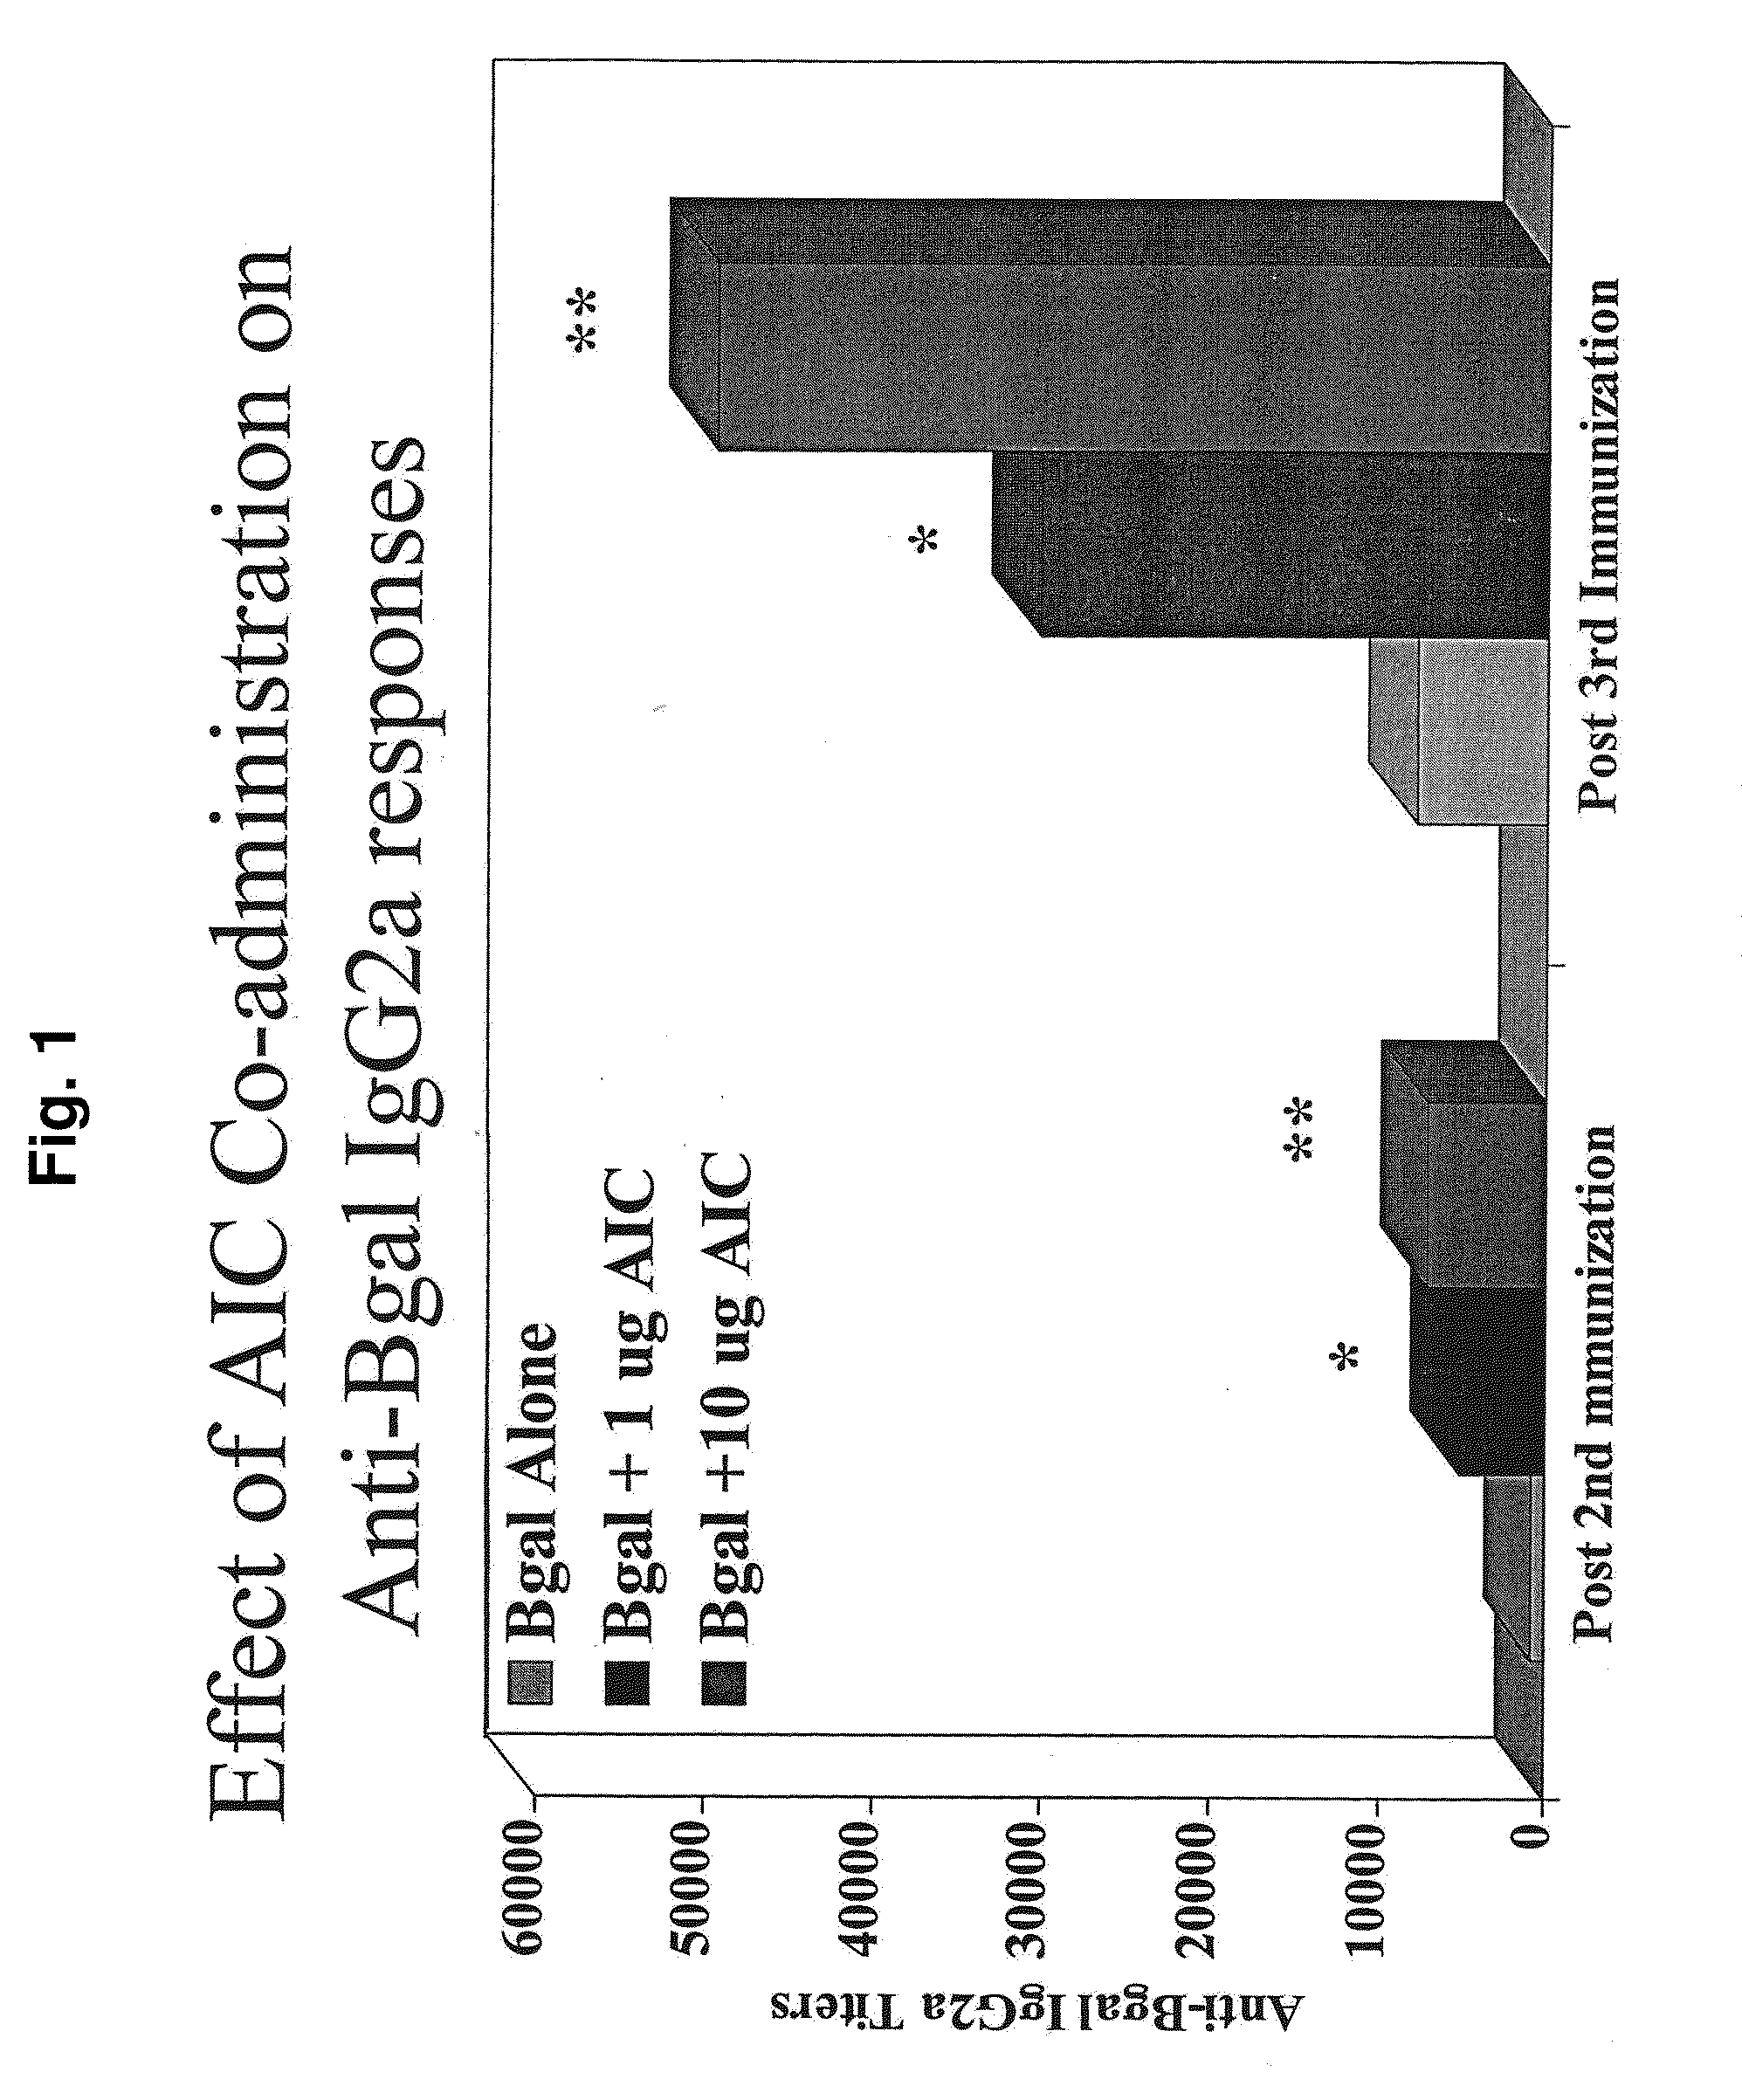 Methods of modulating an immune response using immunostimulatory sequences and compositions for use therein